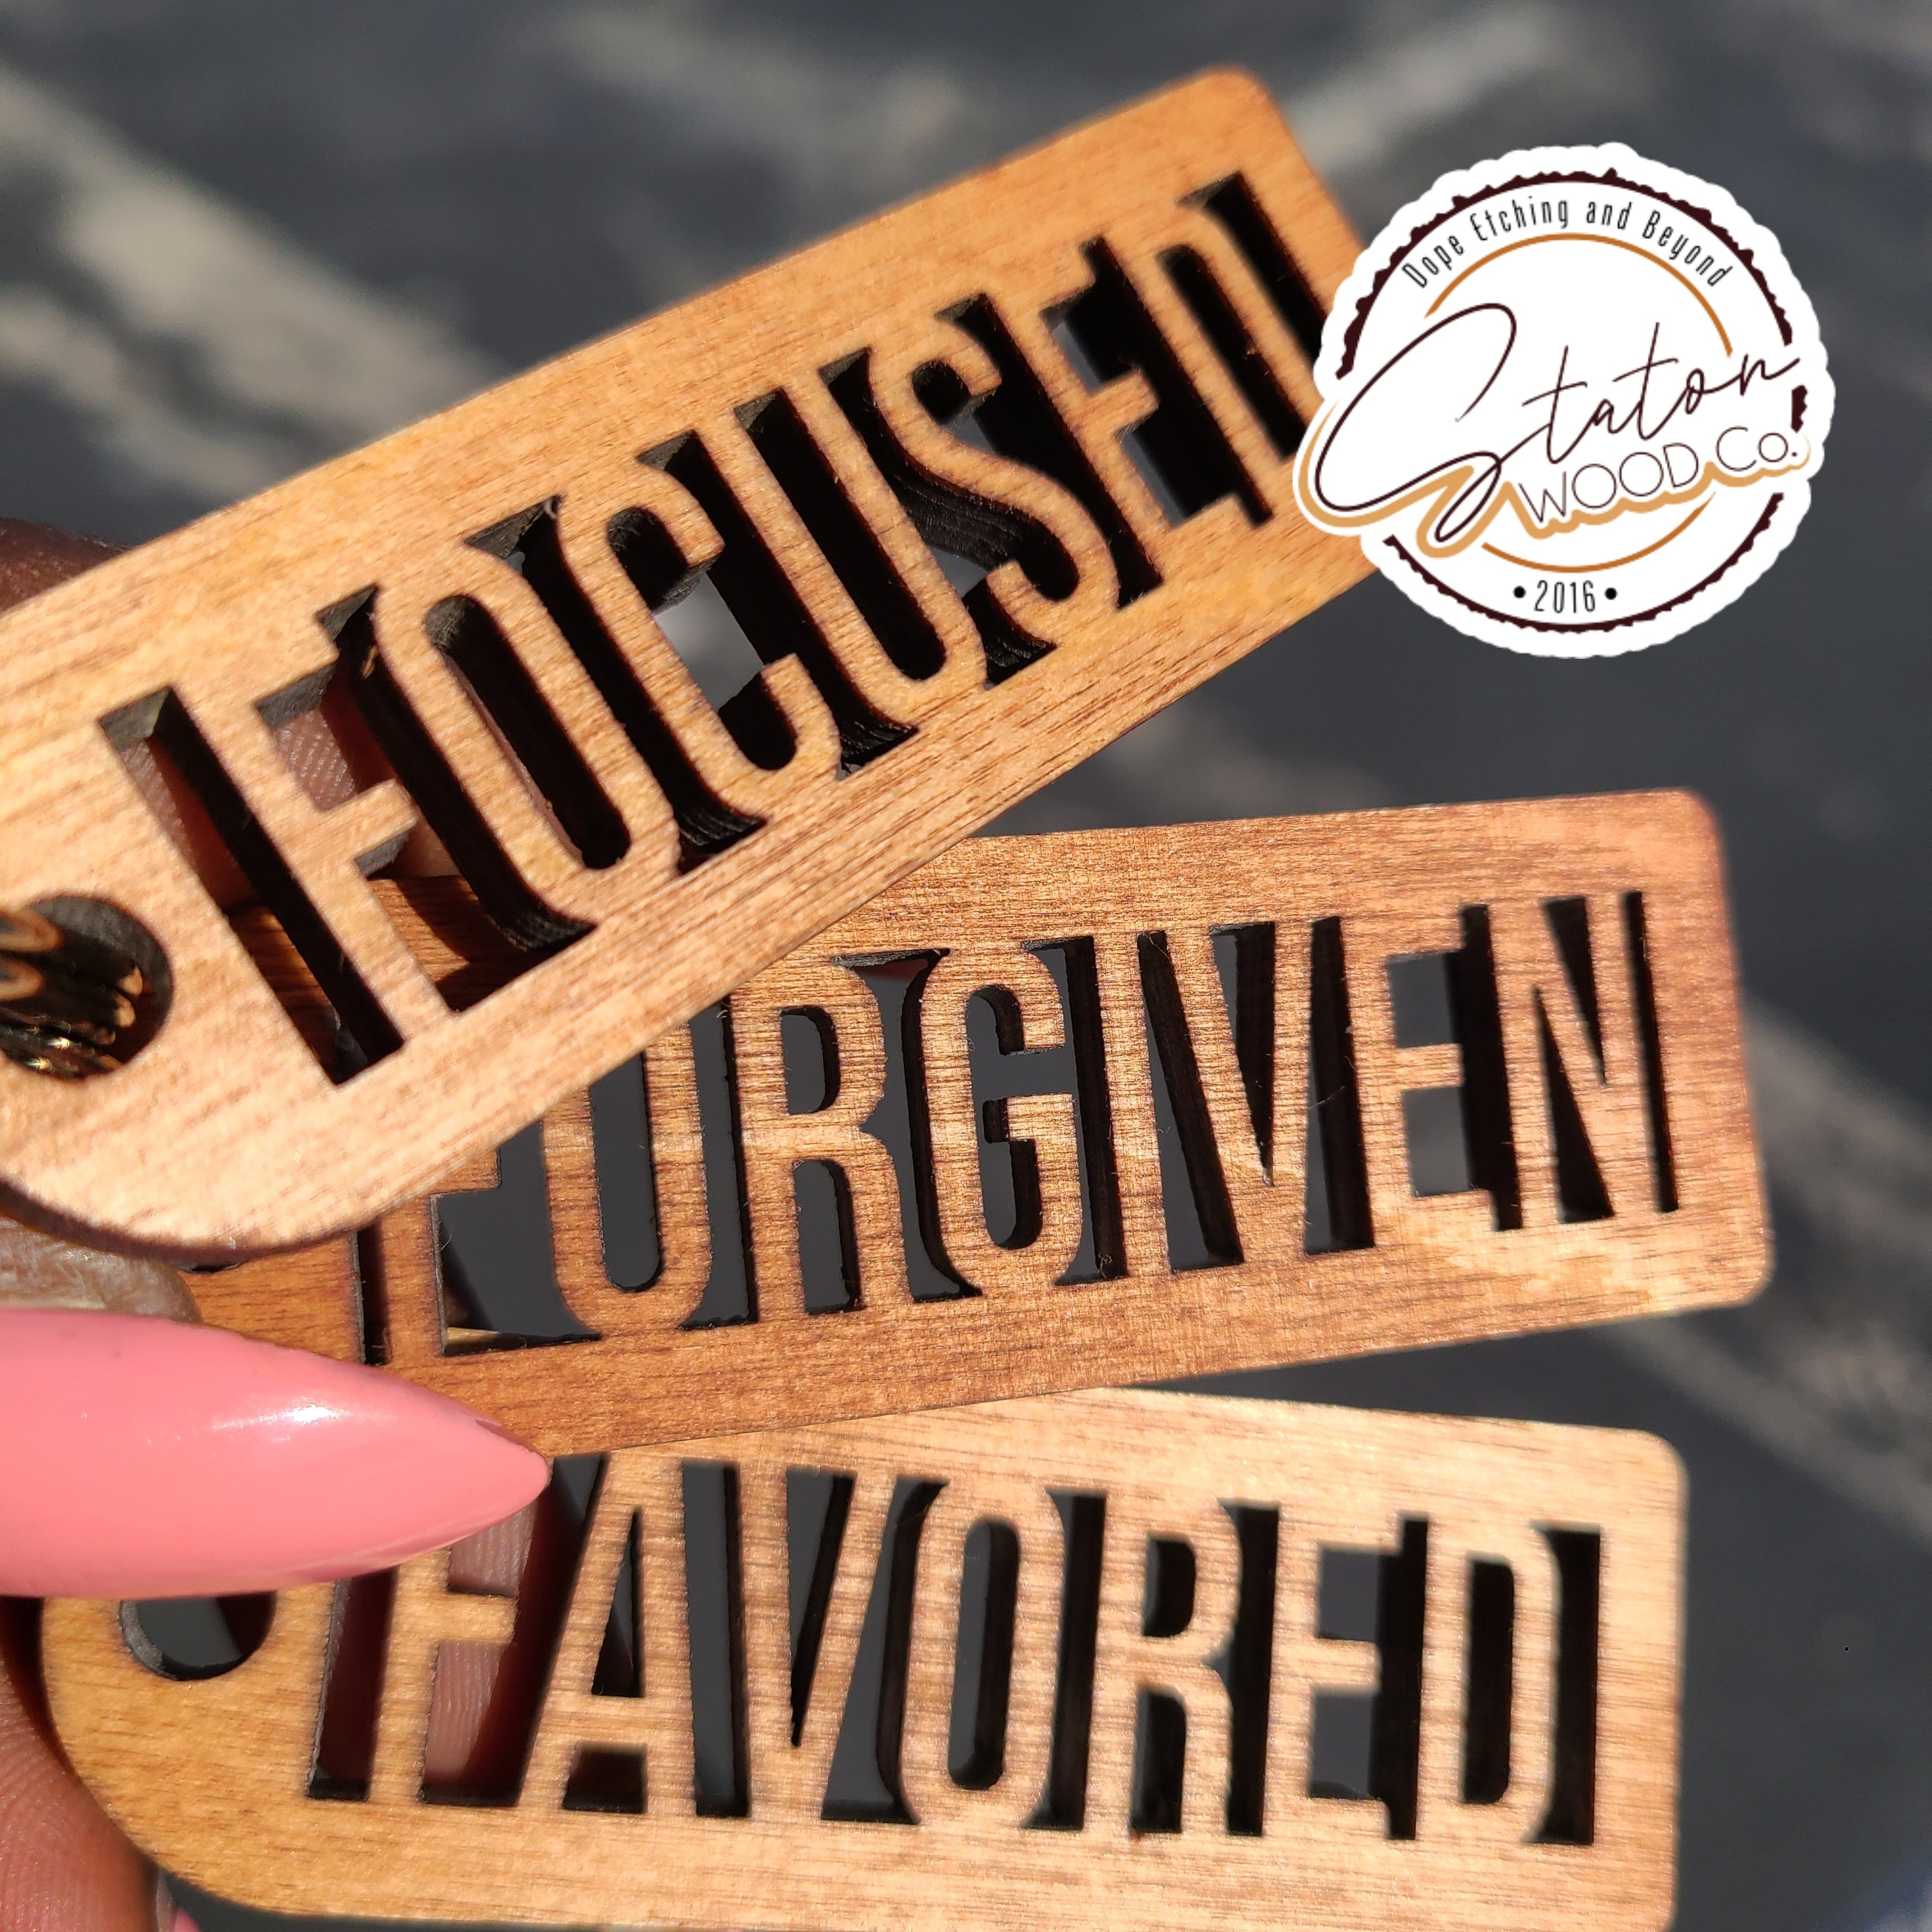 Focused, Favored and Forgiven